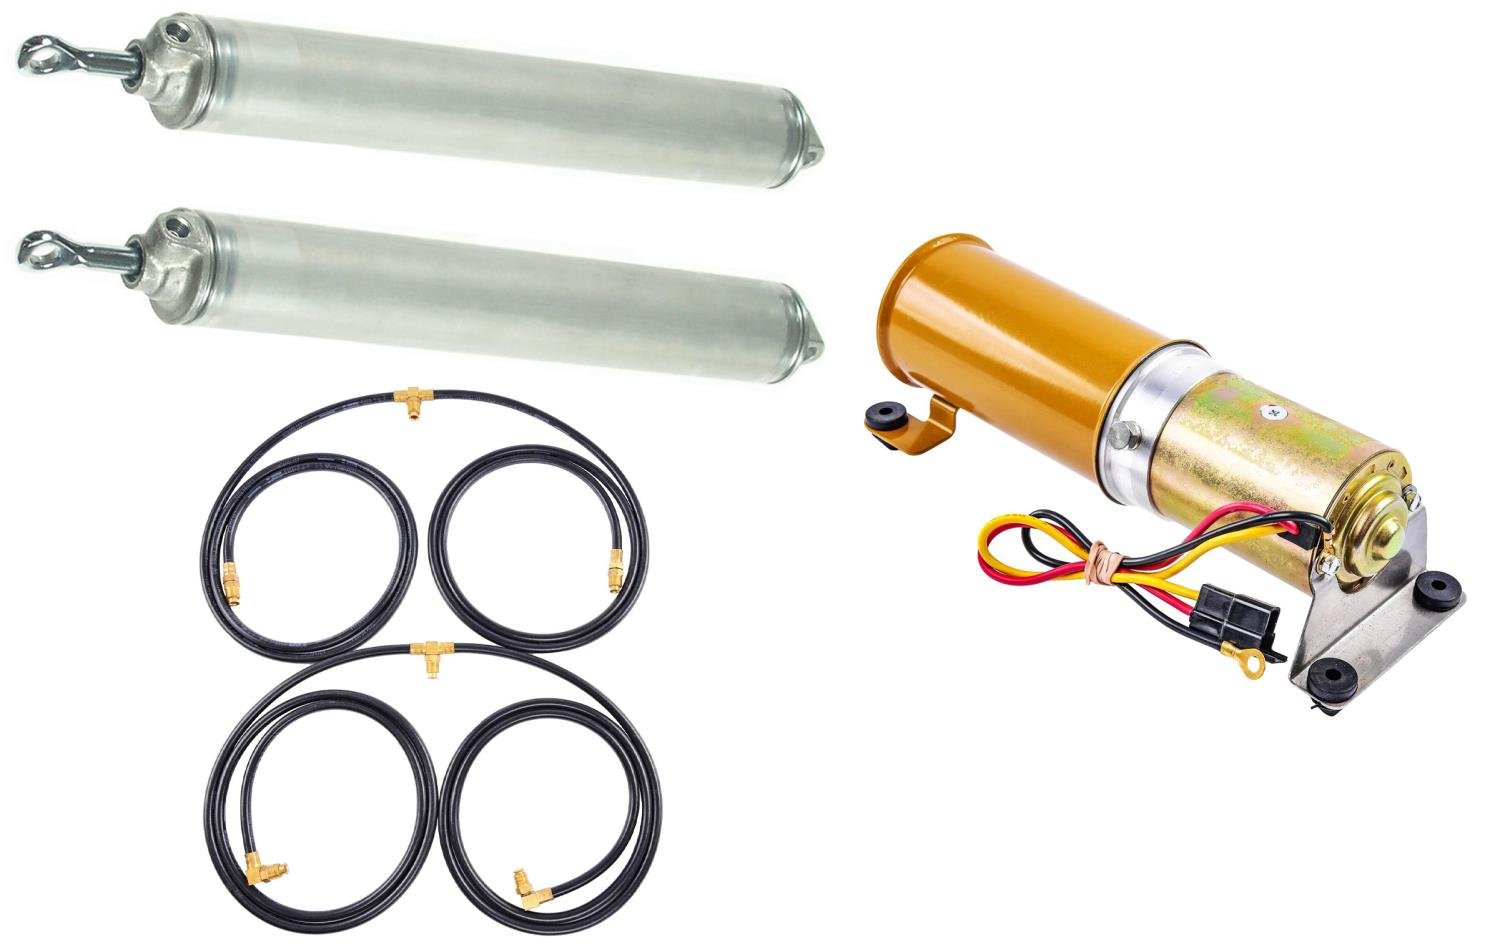 Convertible Top Cylinder, Motor & Hose Kit for 1958 Chevrolet, Pontiac Full-Size Convertibles [Sold as a Kit]